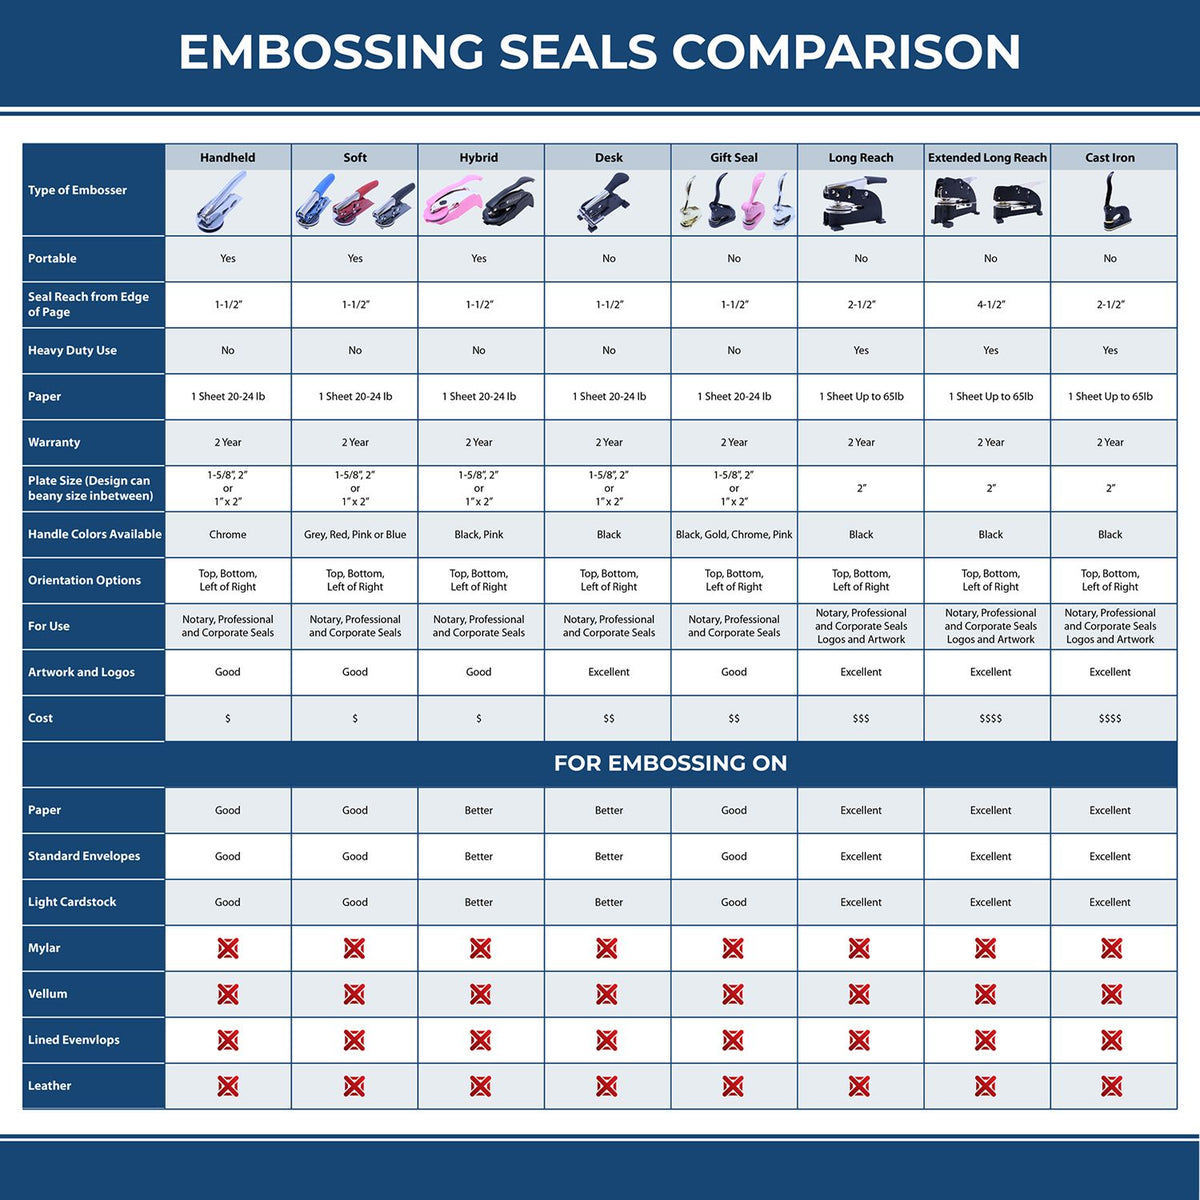 A comparison chart for the different types of mount models available for the Extended Long Reach Texas Architect Seal Embosser.